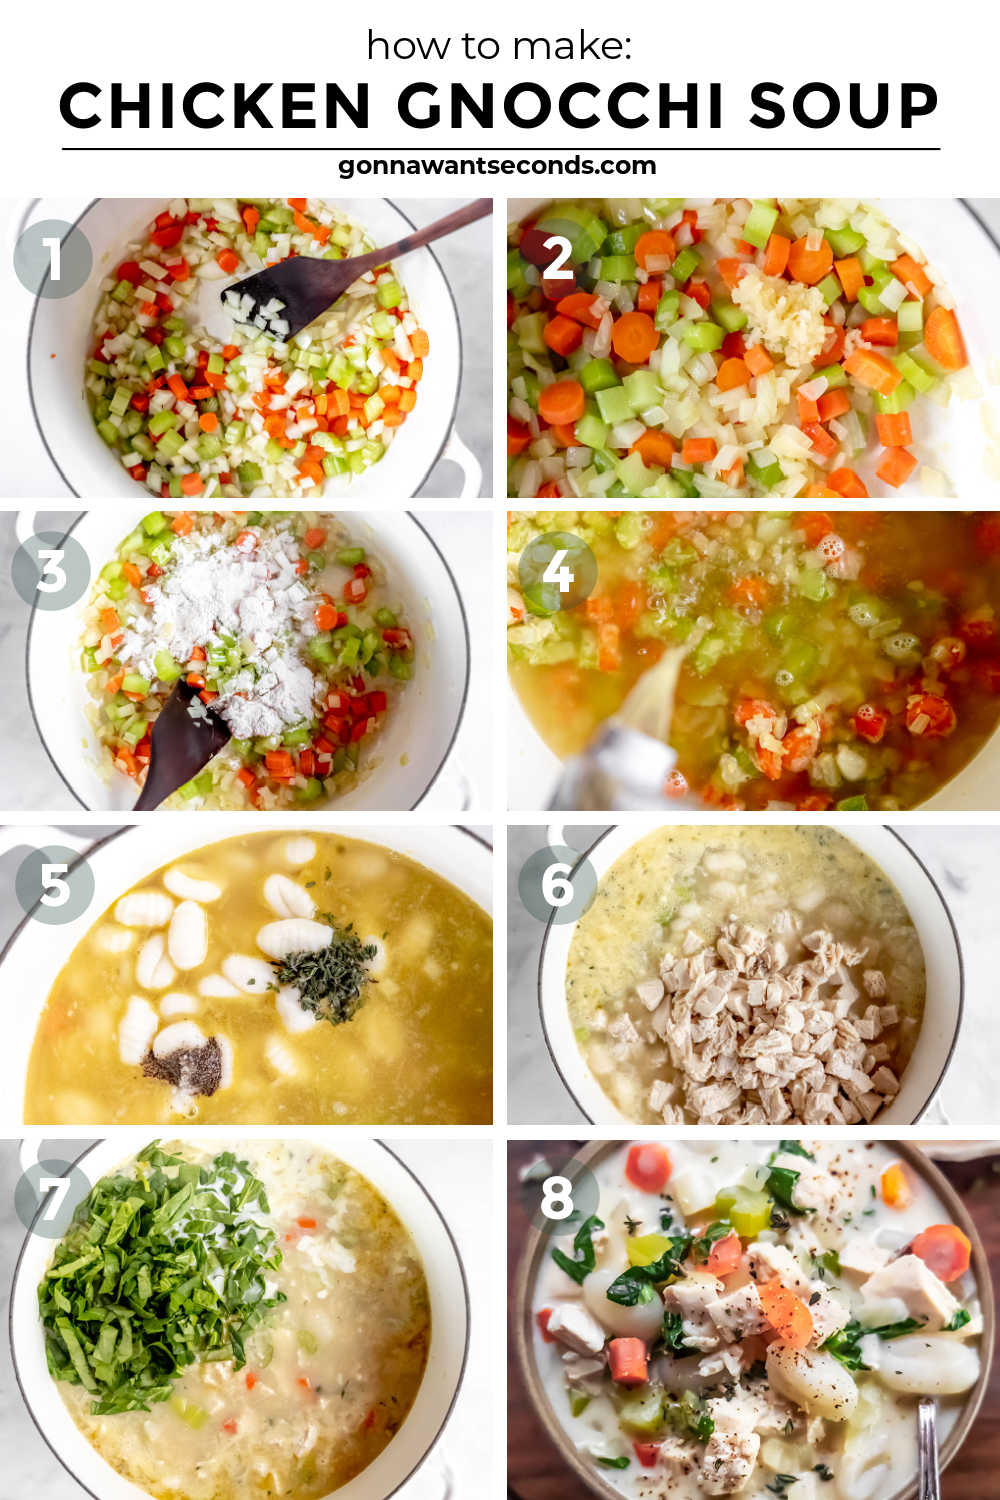 step by step how to make chicken gnocchi soup